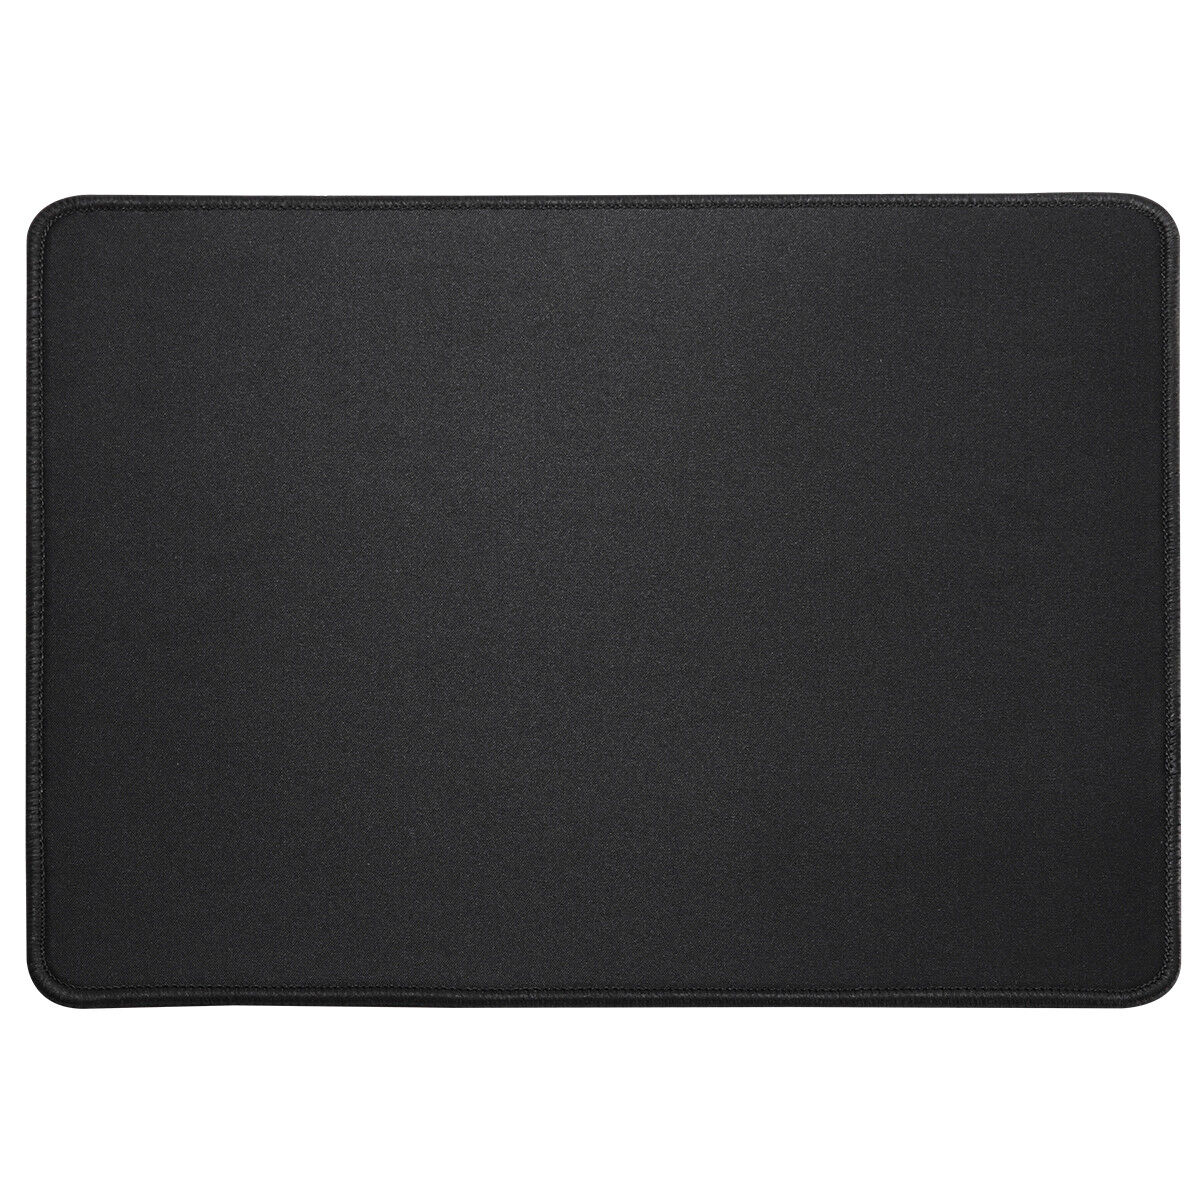 Premium-Textured Computer Mouse Pad with with Stitched Edges for Office & Home